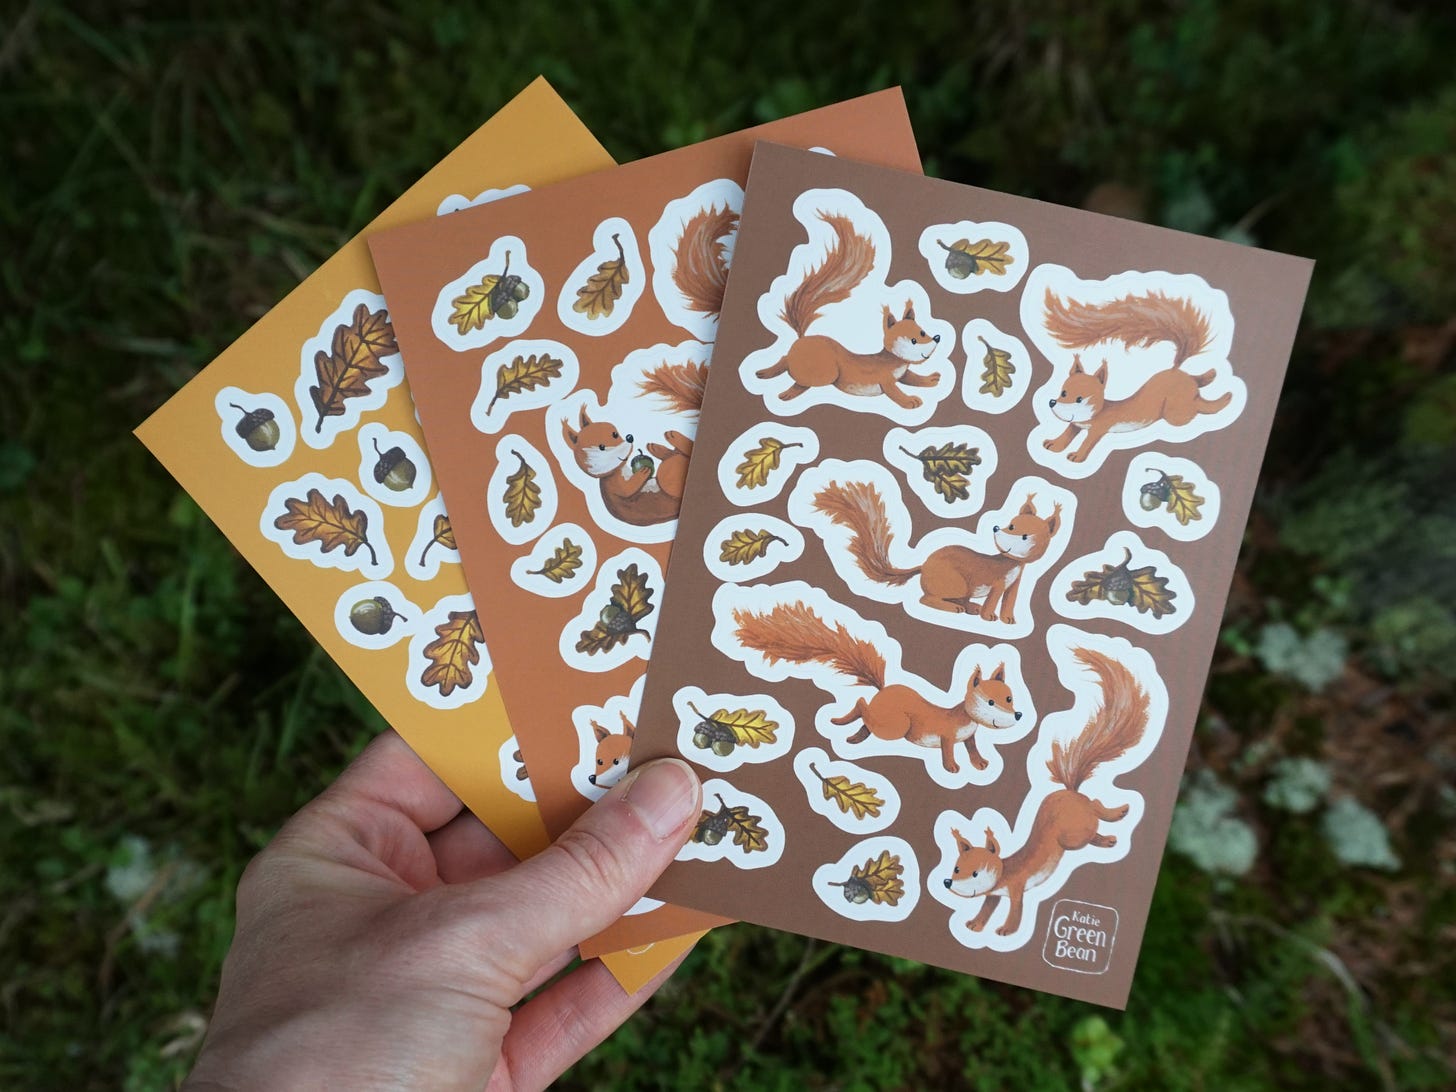 The same hand holds a fan of three more sticker sheets, this time with playful red squirrels, acorns and oak leaves. 